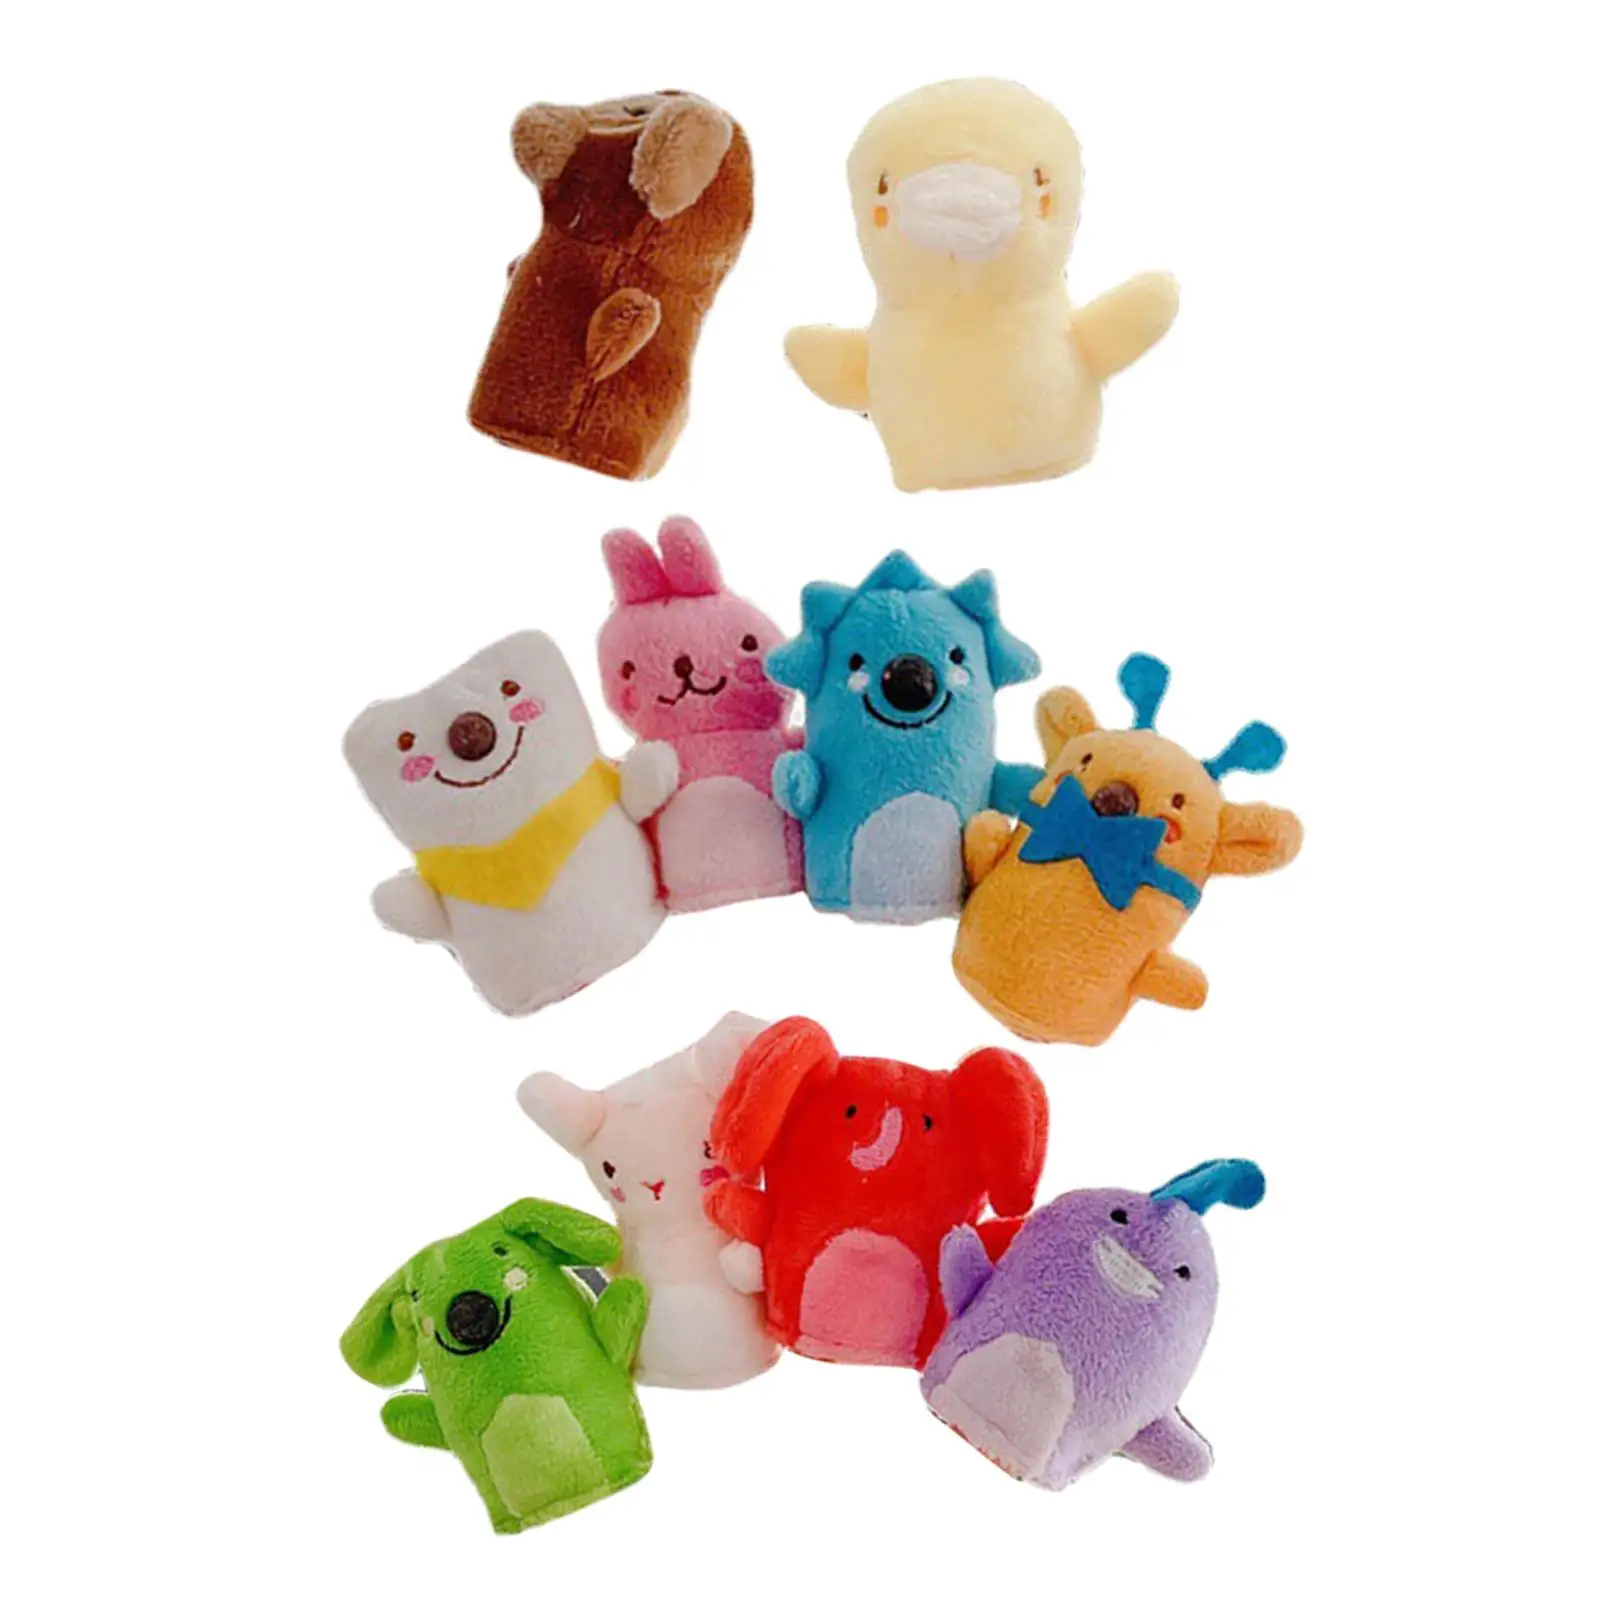 10 Pieces Finger Puppet Playtime Soft for Party Favors Gifts Girls Boys